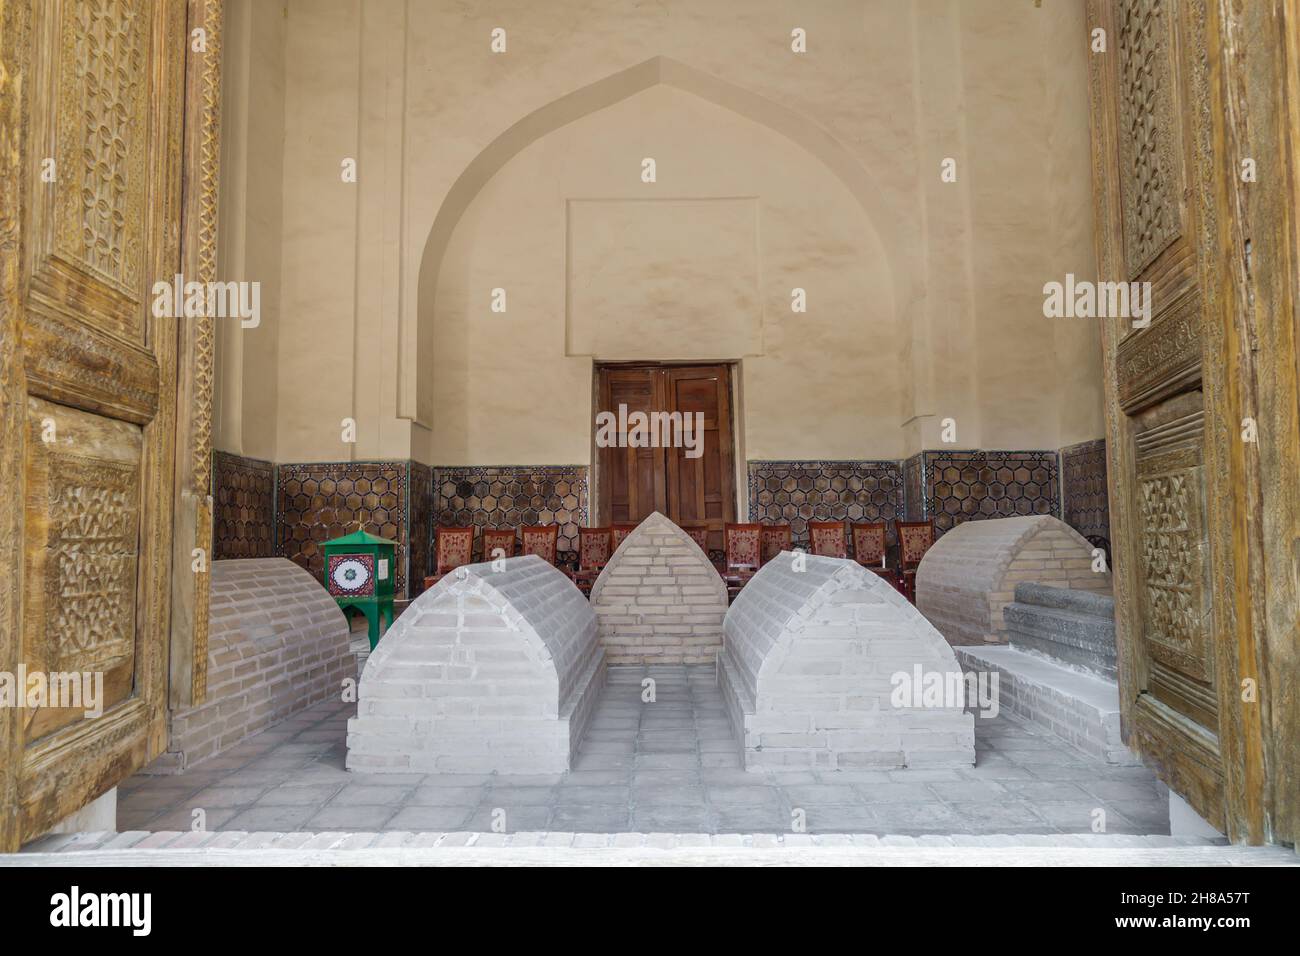 View from street to interior of Rukhabad mausoleum (built in 1380). Ancient gravestones are visible. Shot in Samarkand, Uzbekistan Stock Photo